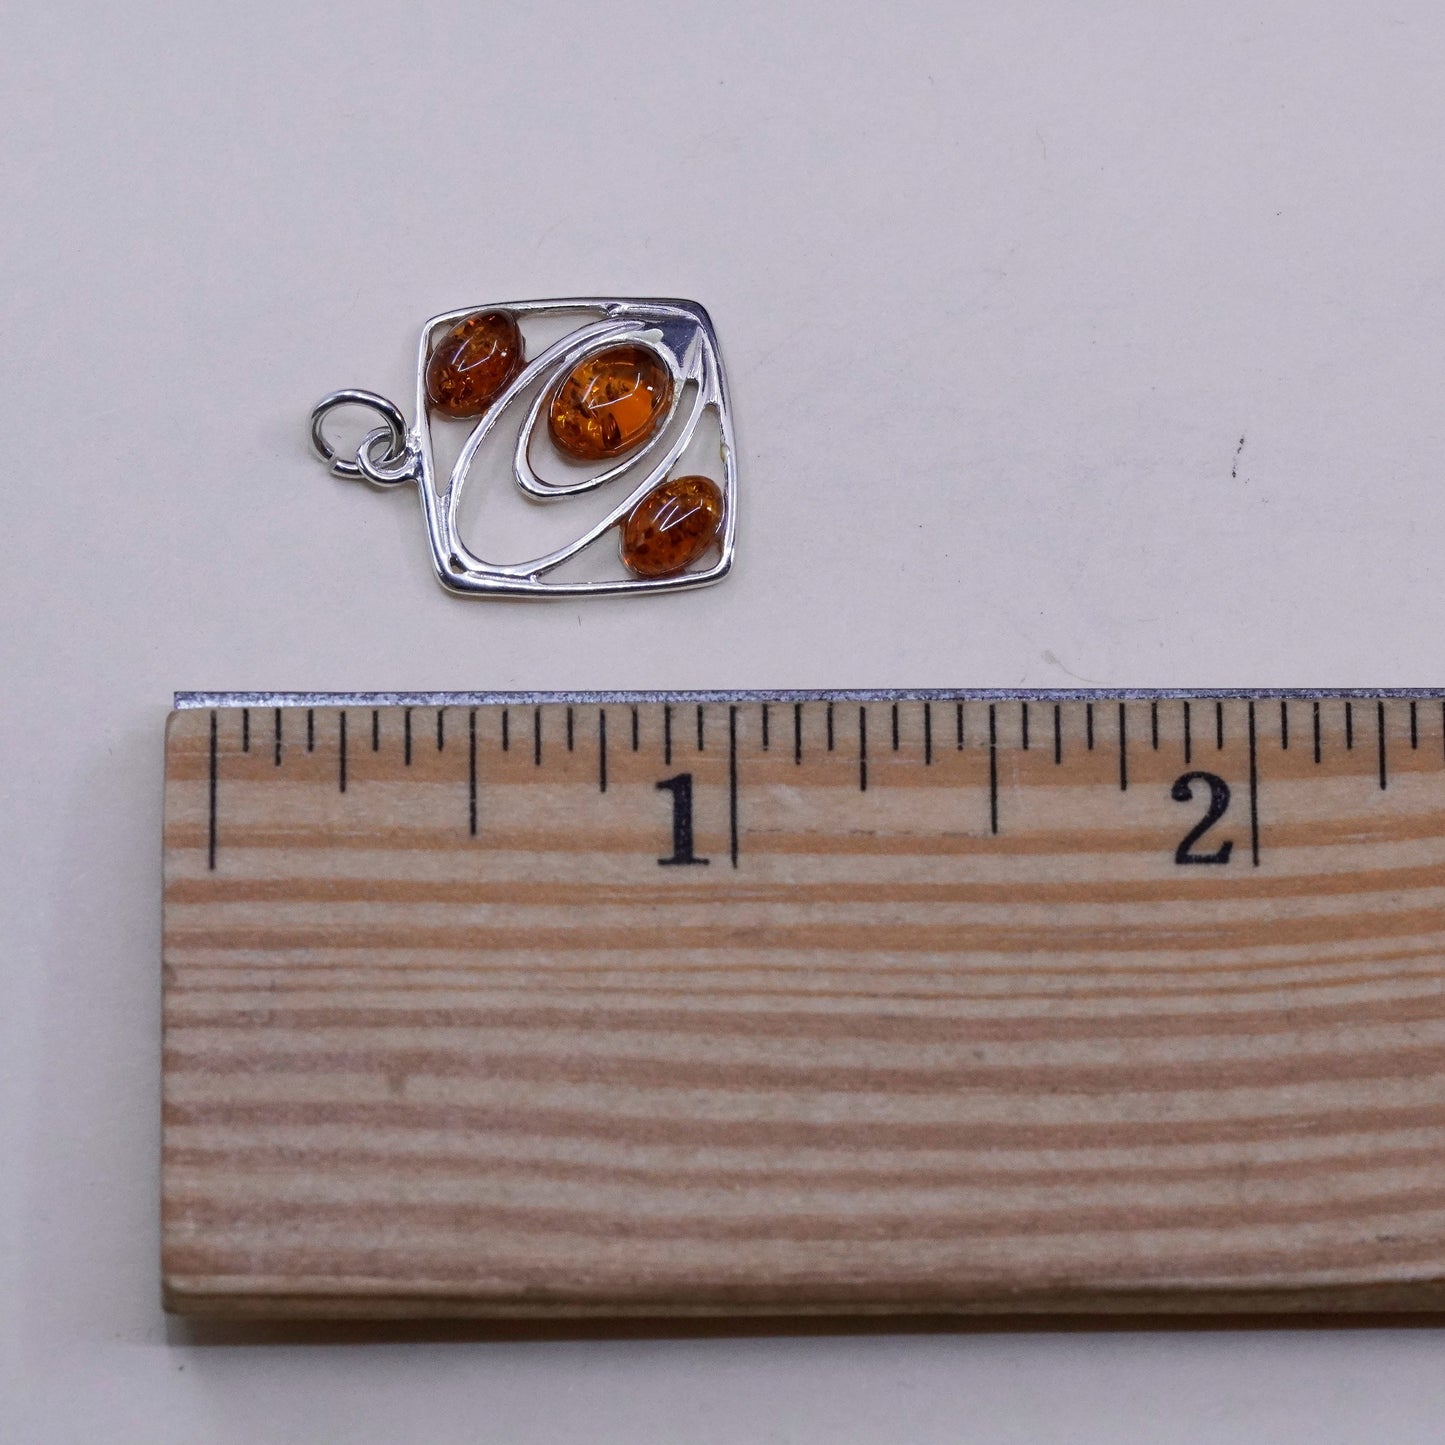 Vintage Sterling 925 silver handmade square charm pendant with Amber